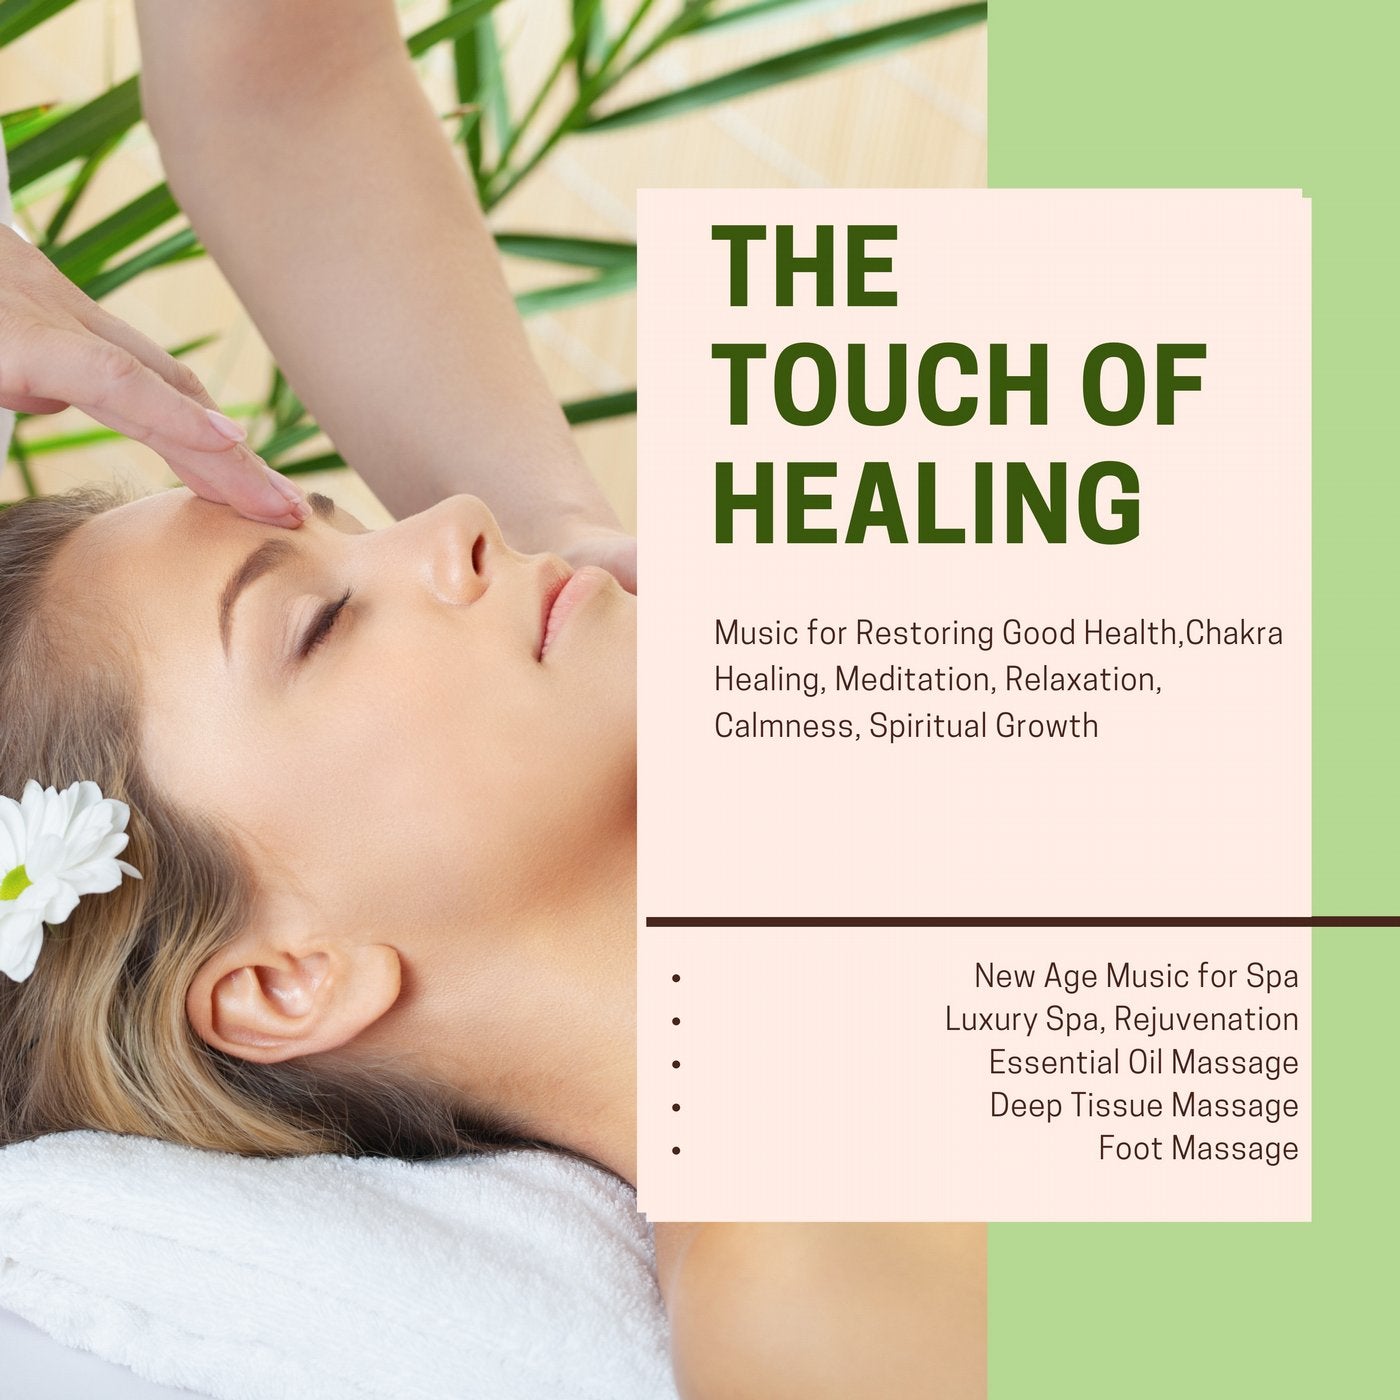 The Touch Of Healing (Music For Restoring Good Health, Chakra Healing, Meditation, Relaxation, Calmness, Spiritual Growth) (New Age Music For Spa, Luxury Spa, Rejuvenation, Essential Oil Massage, Deep Tissue Massage, Foot Massage)